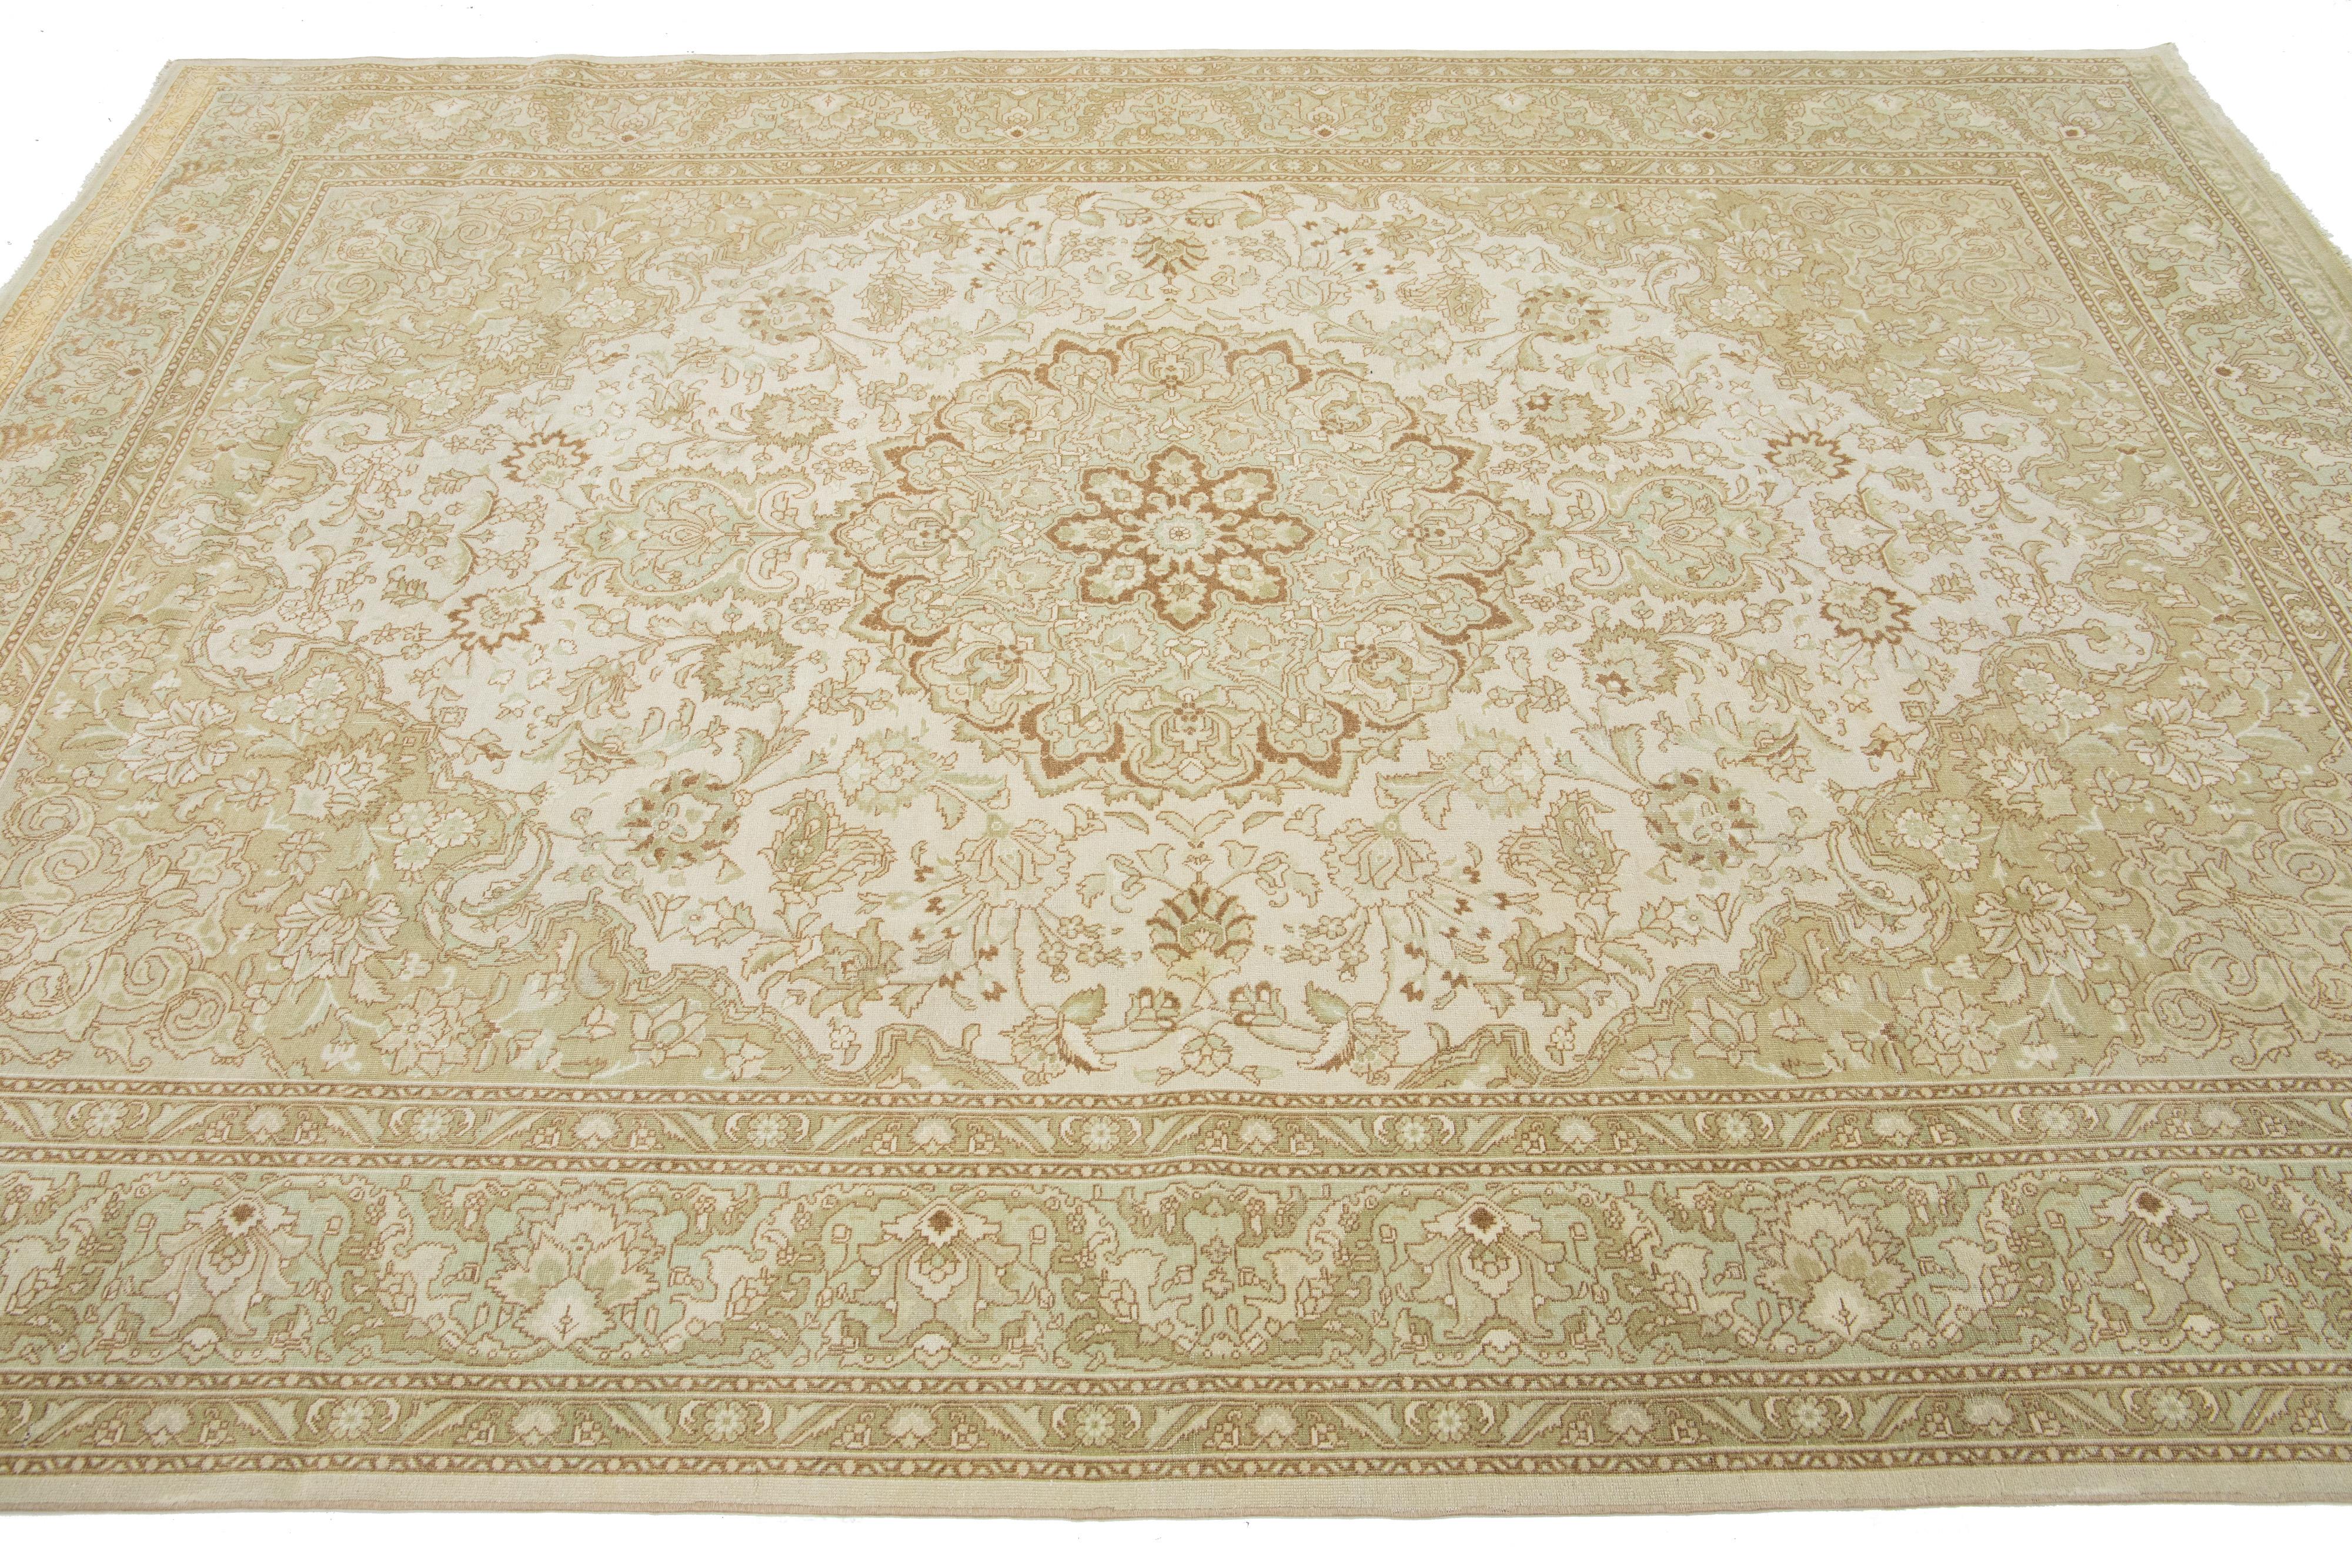 1920s Antique Persian Tabriz Wool Rug Allover Floral In Beige Color In Excellent Condition For Sale In Norwalk, CT